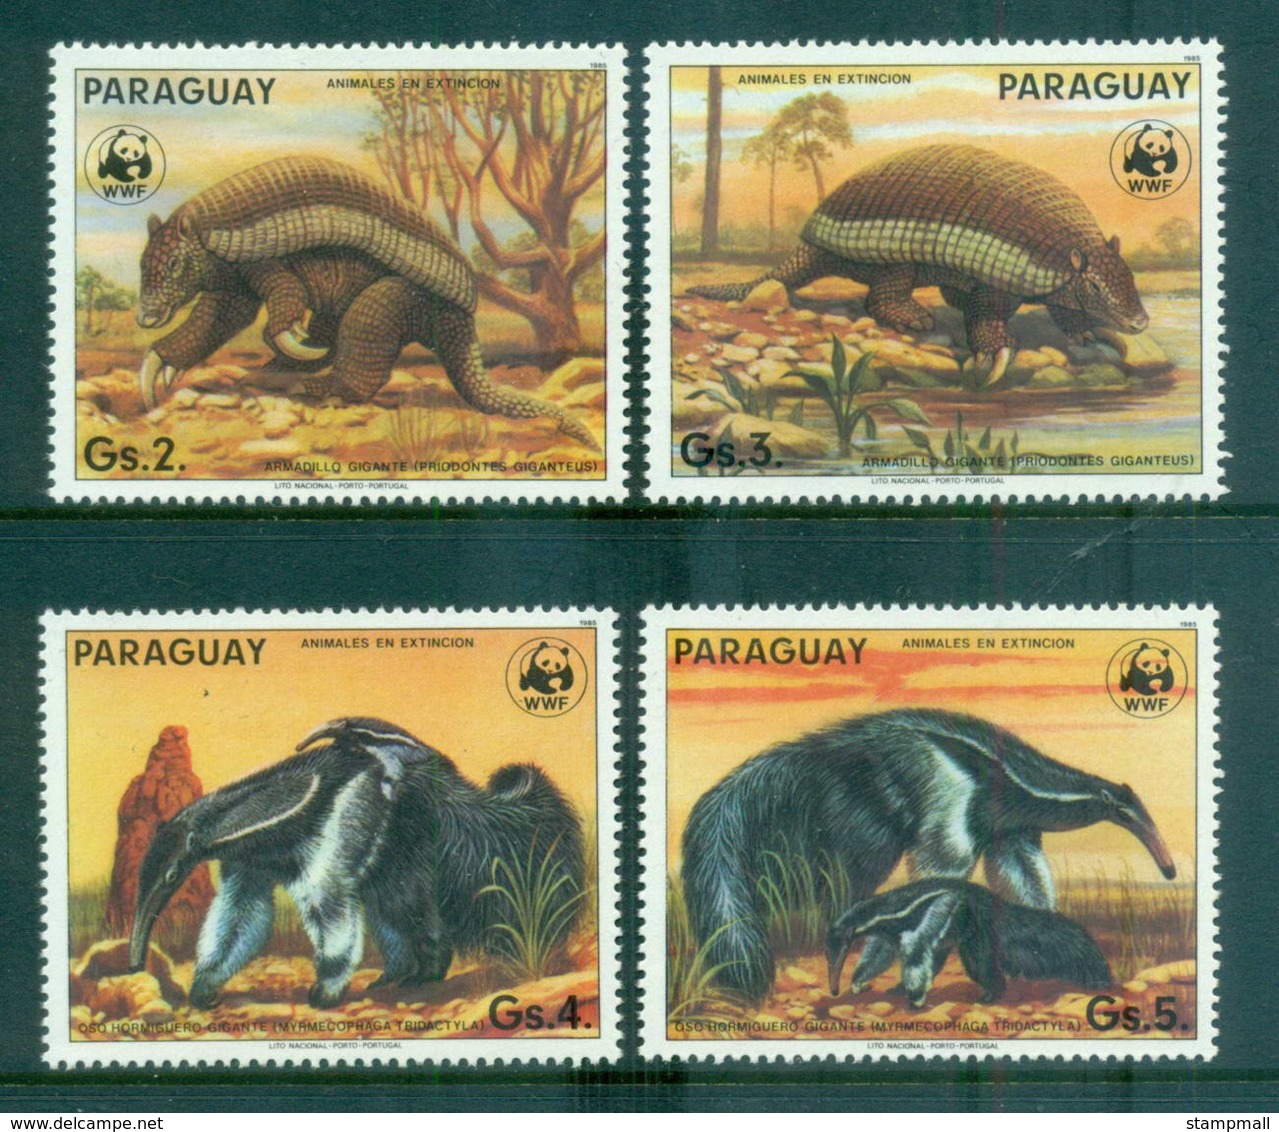 Paraguay 1985 WWF Ant-Eating Giants MUH Lot64089 - Paraguay